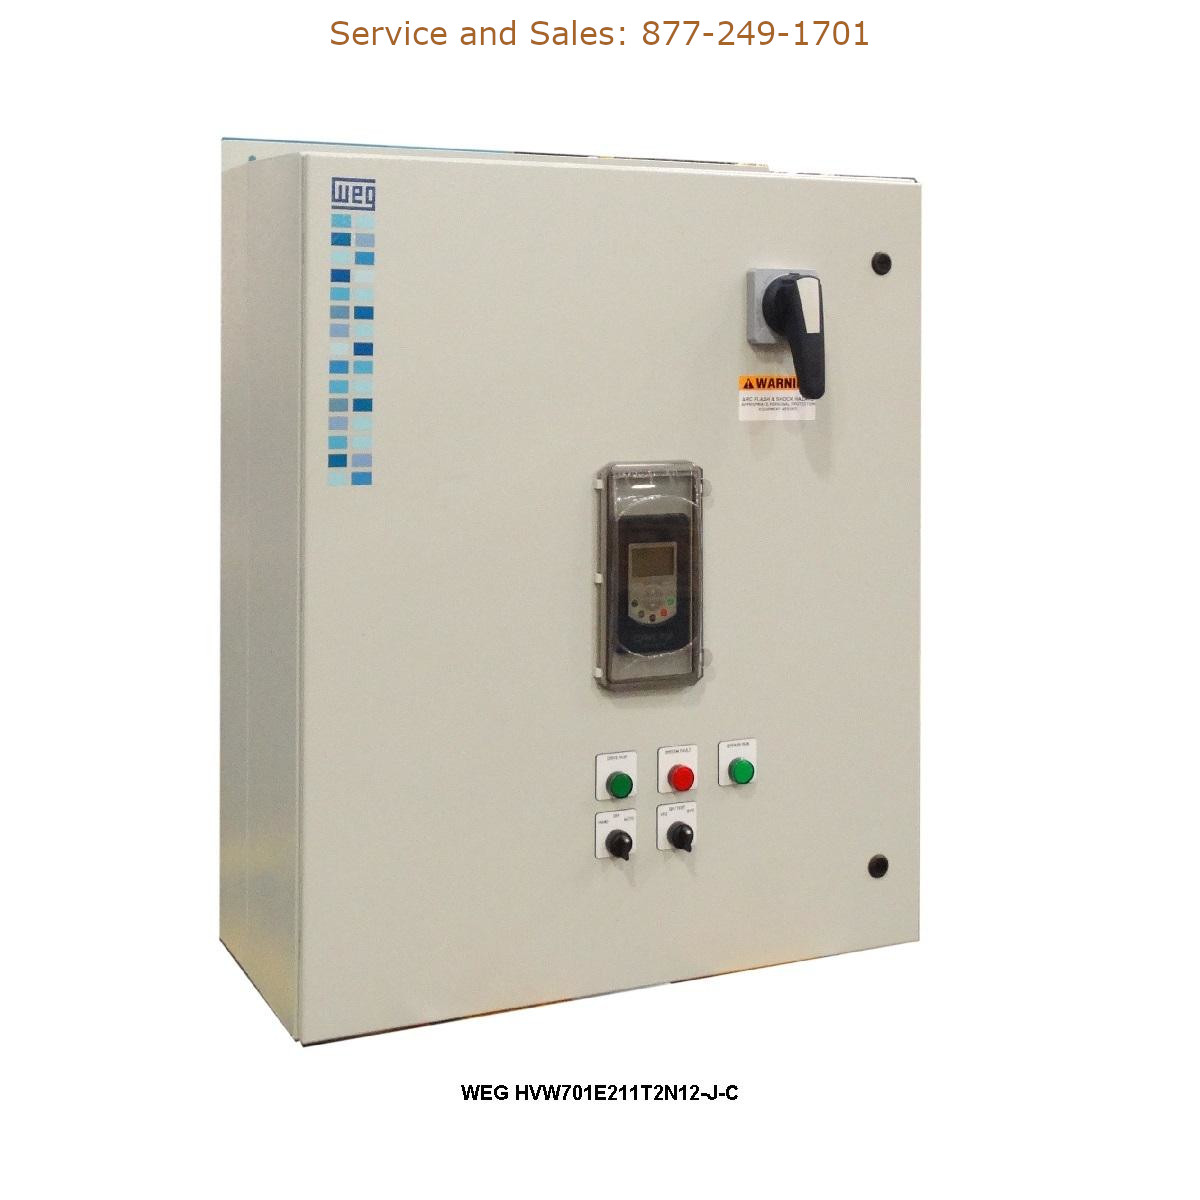 WEG HVW701E211T2N12-J-C WEG Model Number HVW701E211T2N12-J-C WEG Drives, Variable Speed Drives Repair Service, Troubleshooting, Replacement Parts https://gesrepair.com/wp-content/uploads/2022/WEG/WEG_HVW701E211T2N12-J-C_Drives_Variable_Speed_Drives.jpg